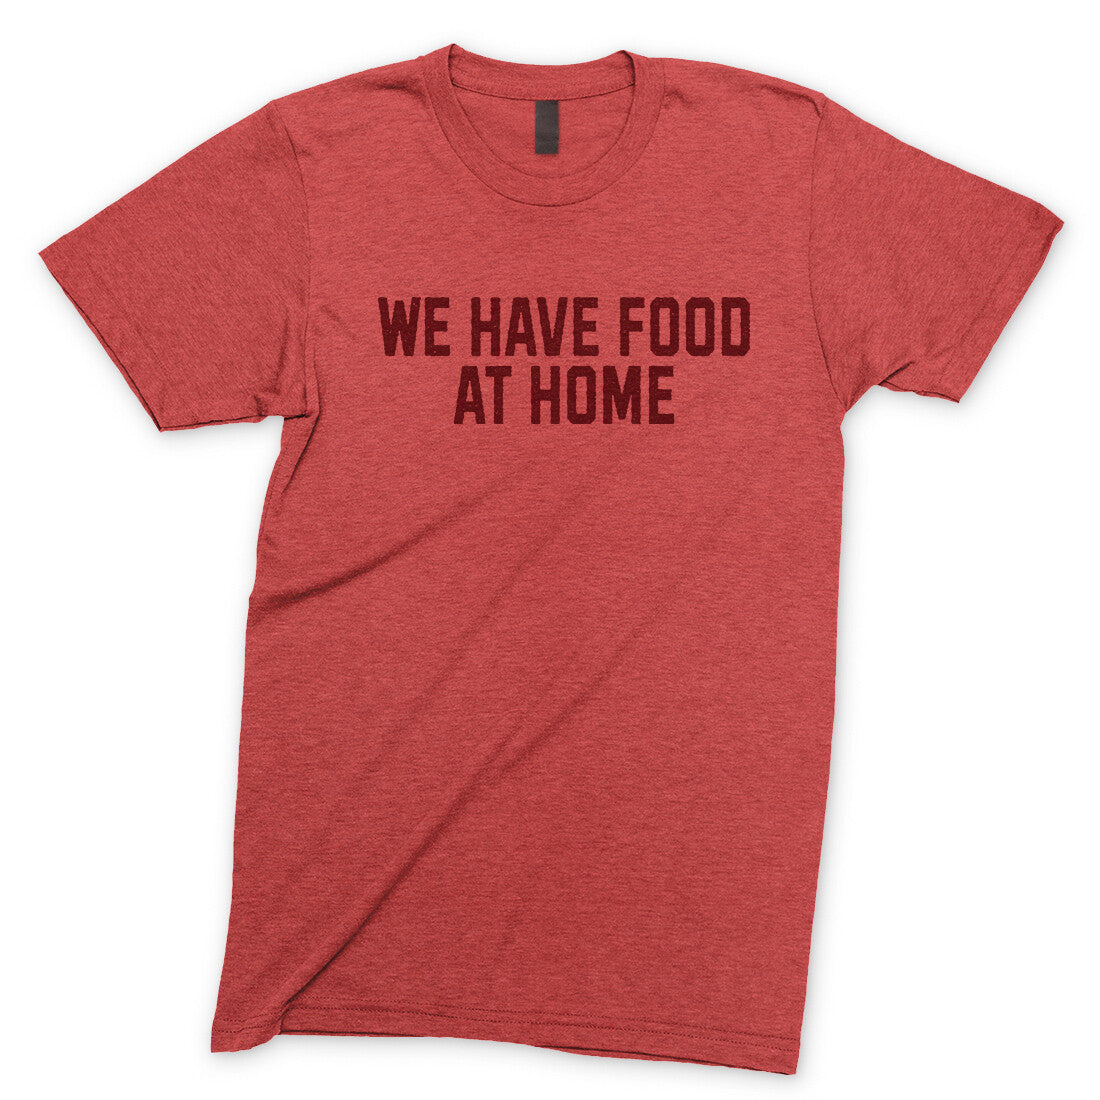 We Have Food at Home in Heather Red Color